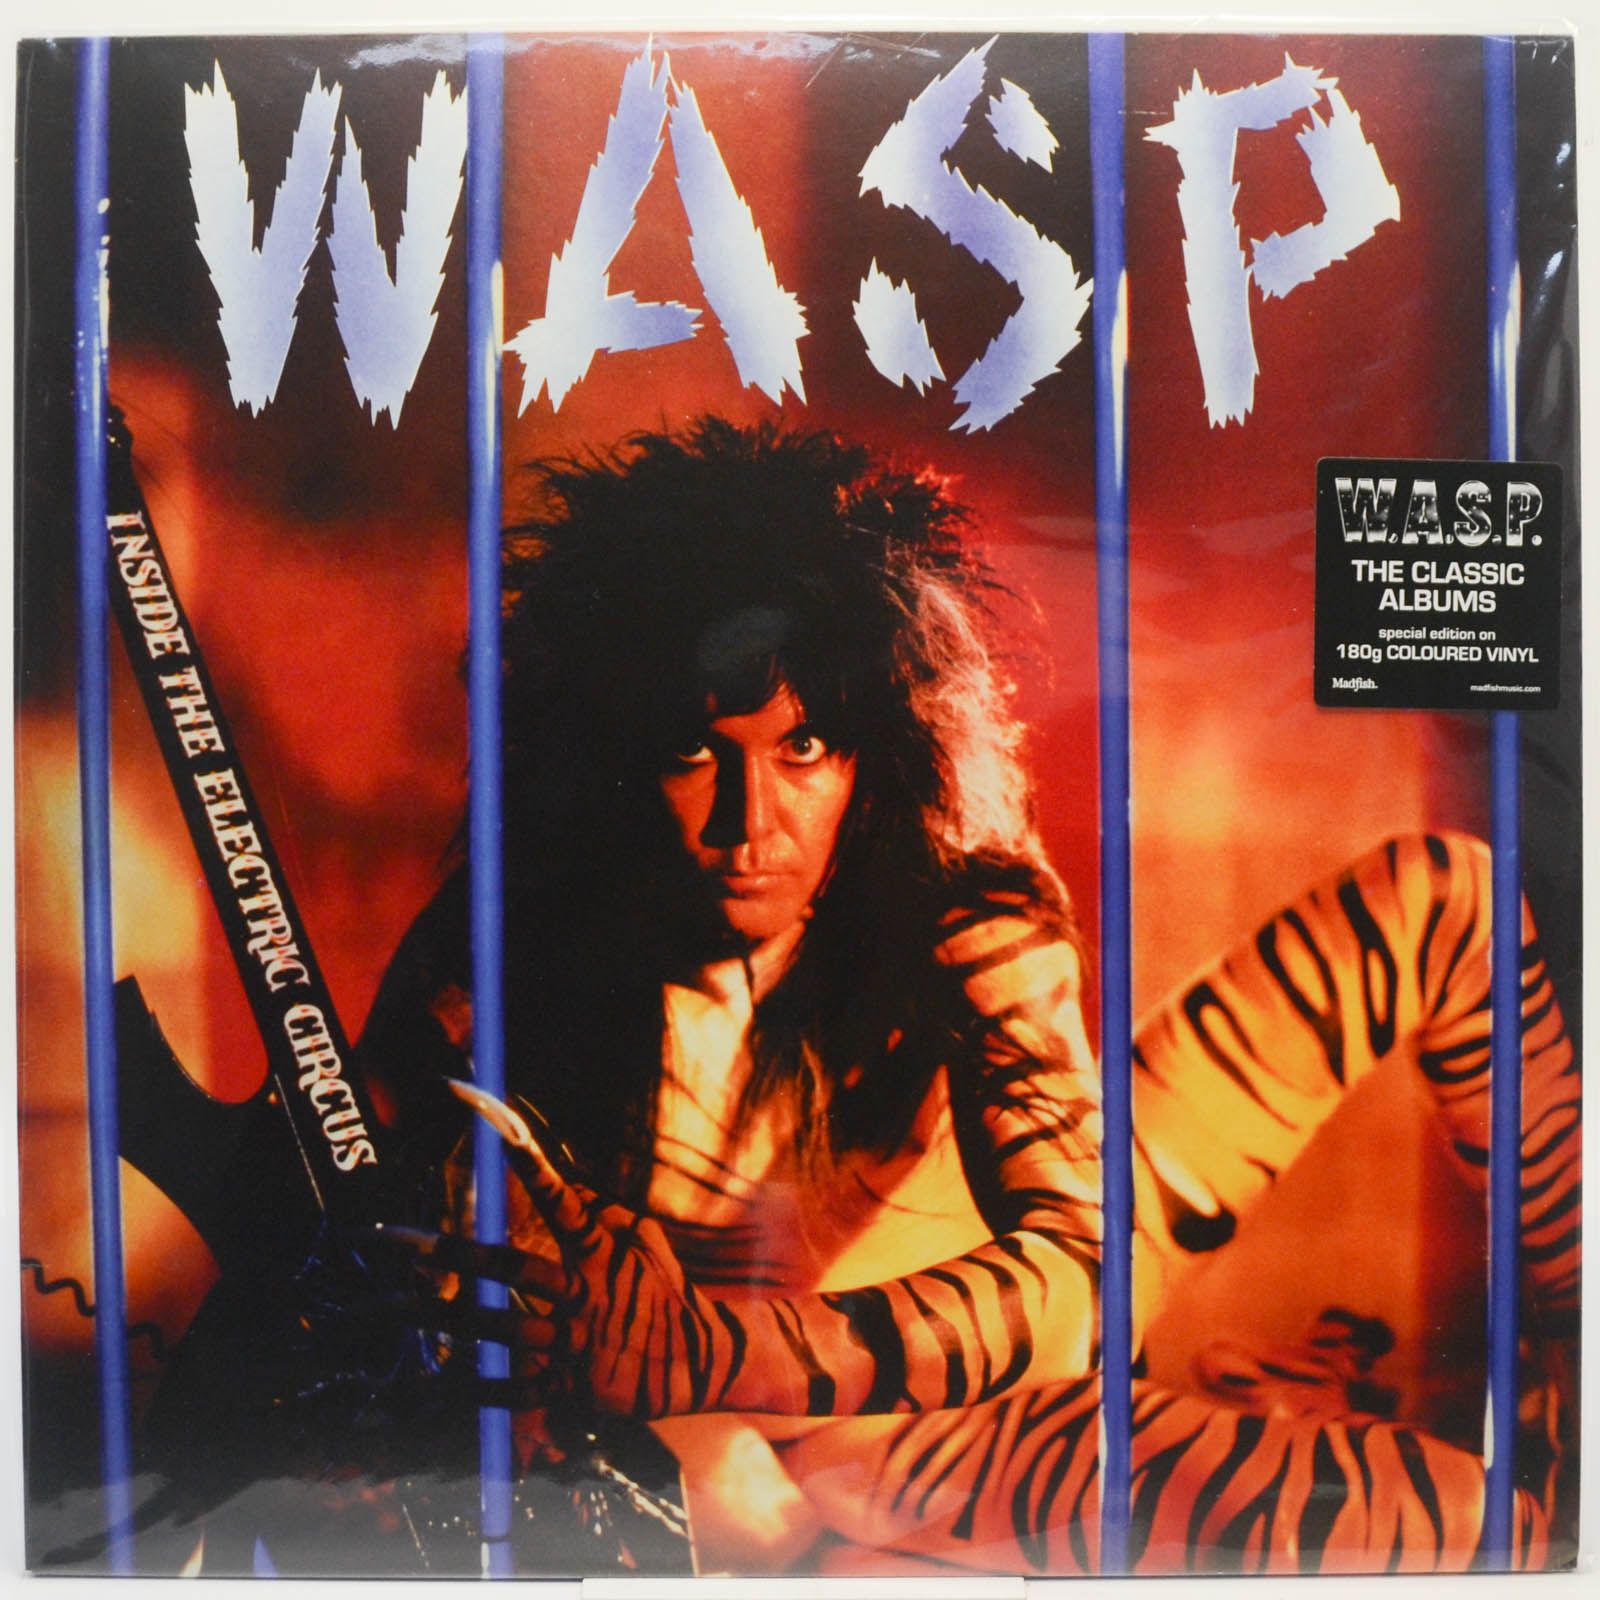 W.A.S.P. — Inside The Electric Circus, 1986